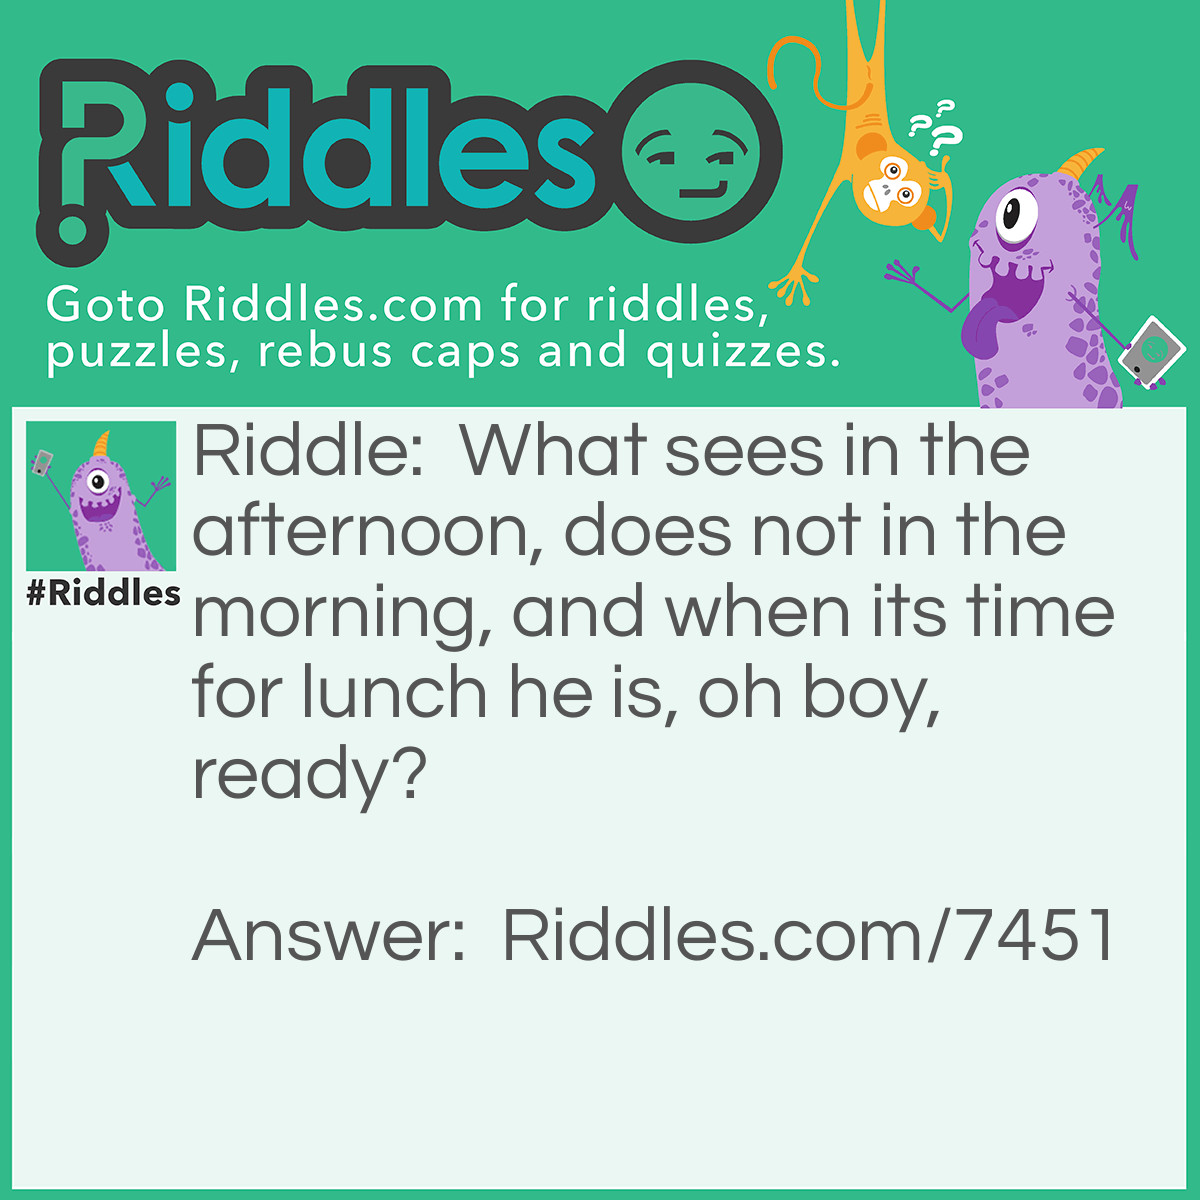 Riddle: What sees in the afternoon, does not in the morning, and when its time for lunch he is, oh boy, ready? Answer: Someone who sleeps in.